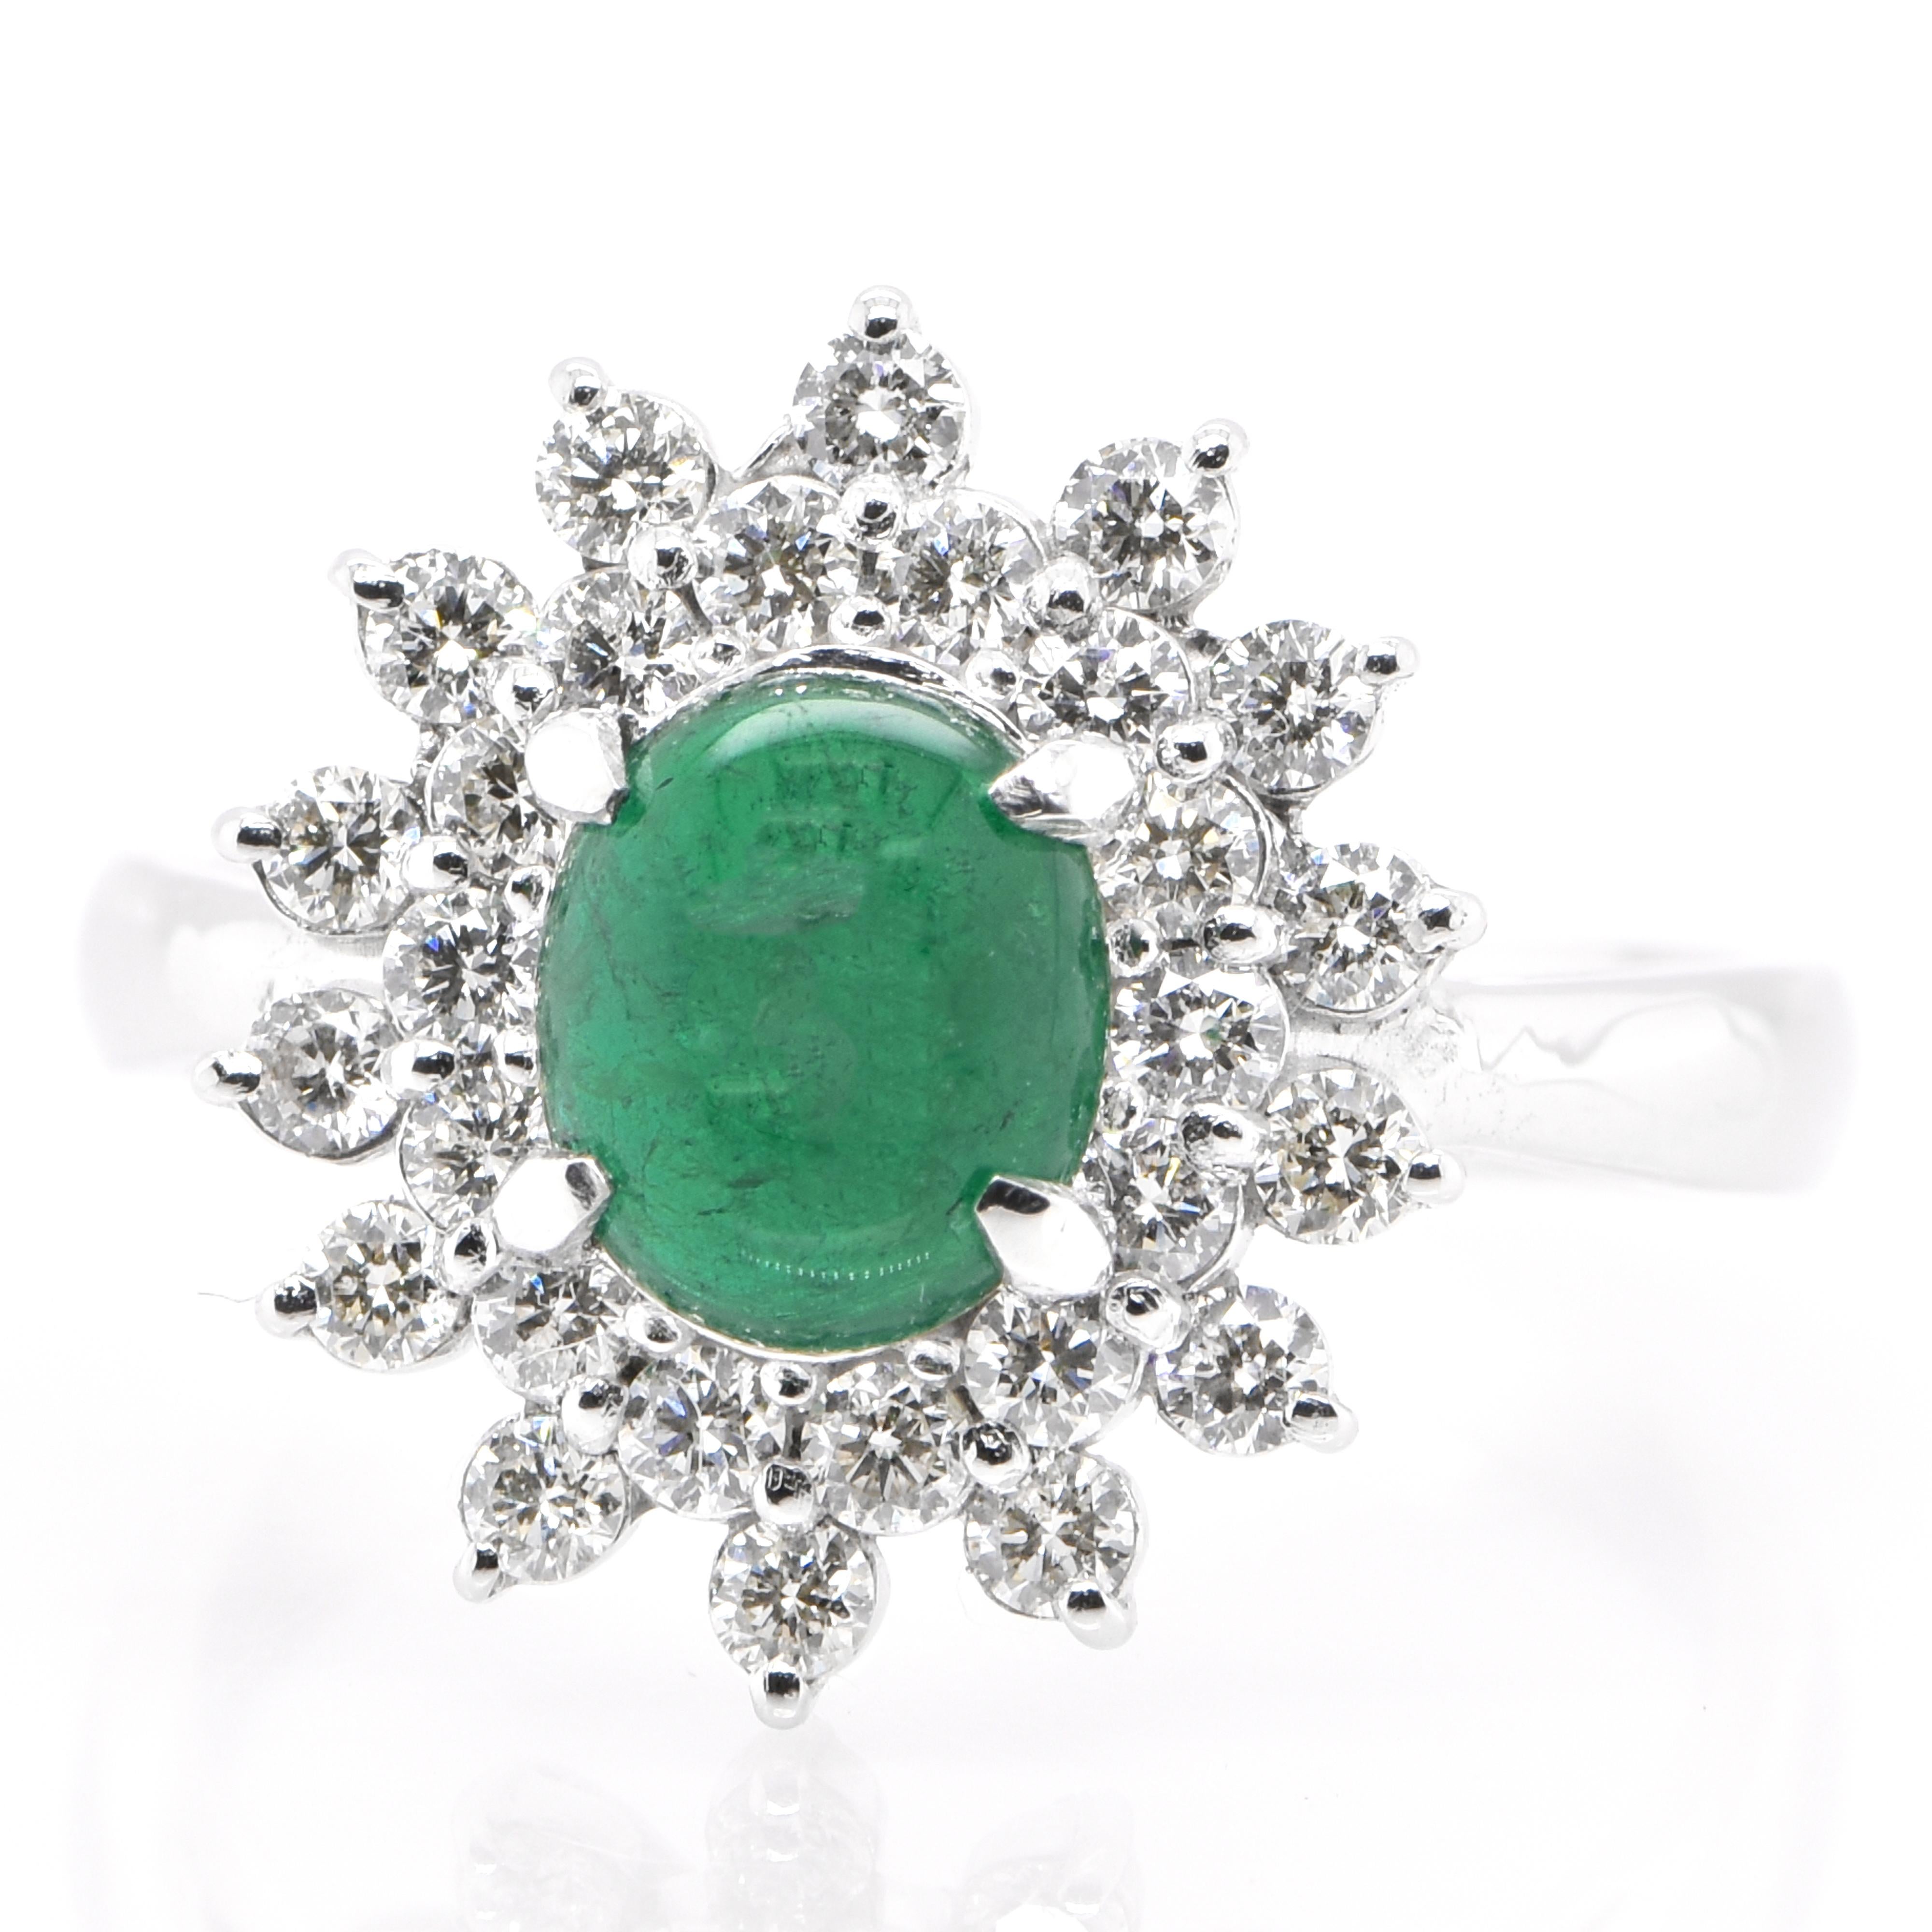 A stunning ring featuring a 1.17 Carat Natural Emerald and 0.70 Carats of Diamond Accents set in Platinum. People have admired emerald’s green for thousands of years. Emeralds have always been associated with the lushest landscapes and the richest